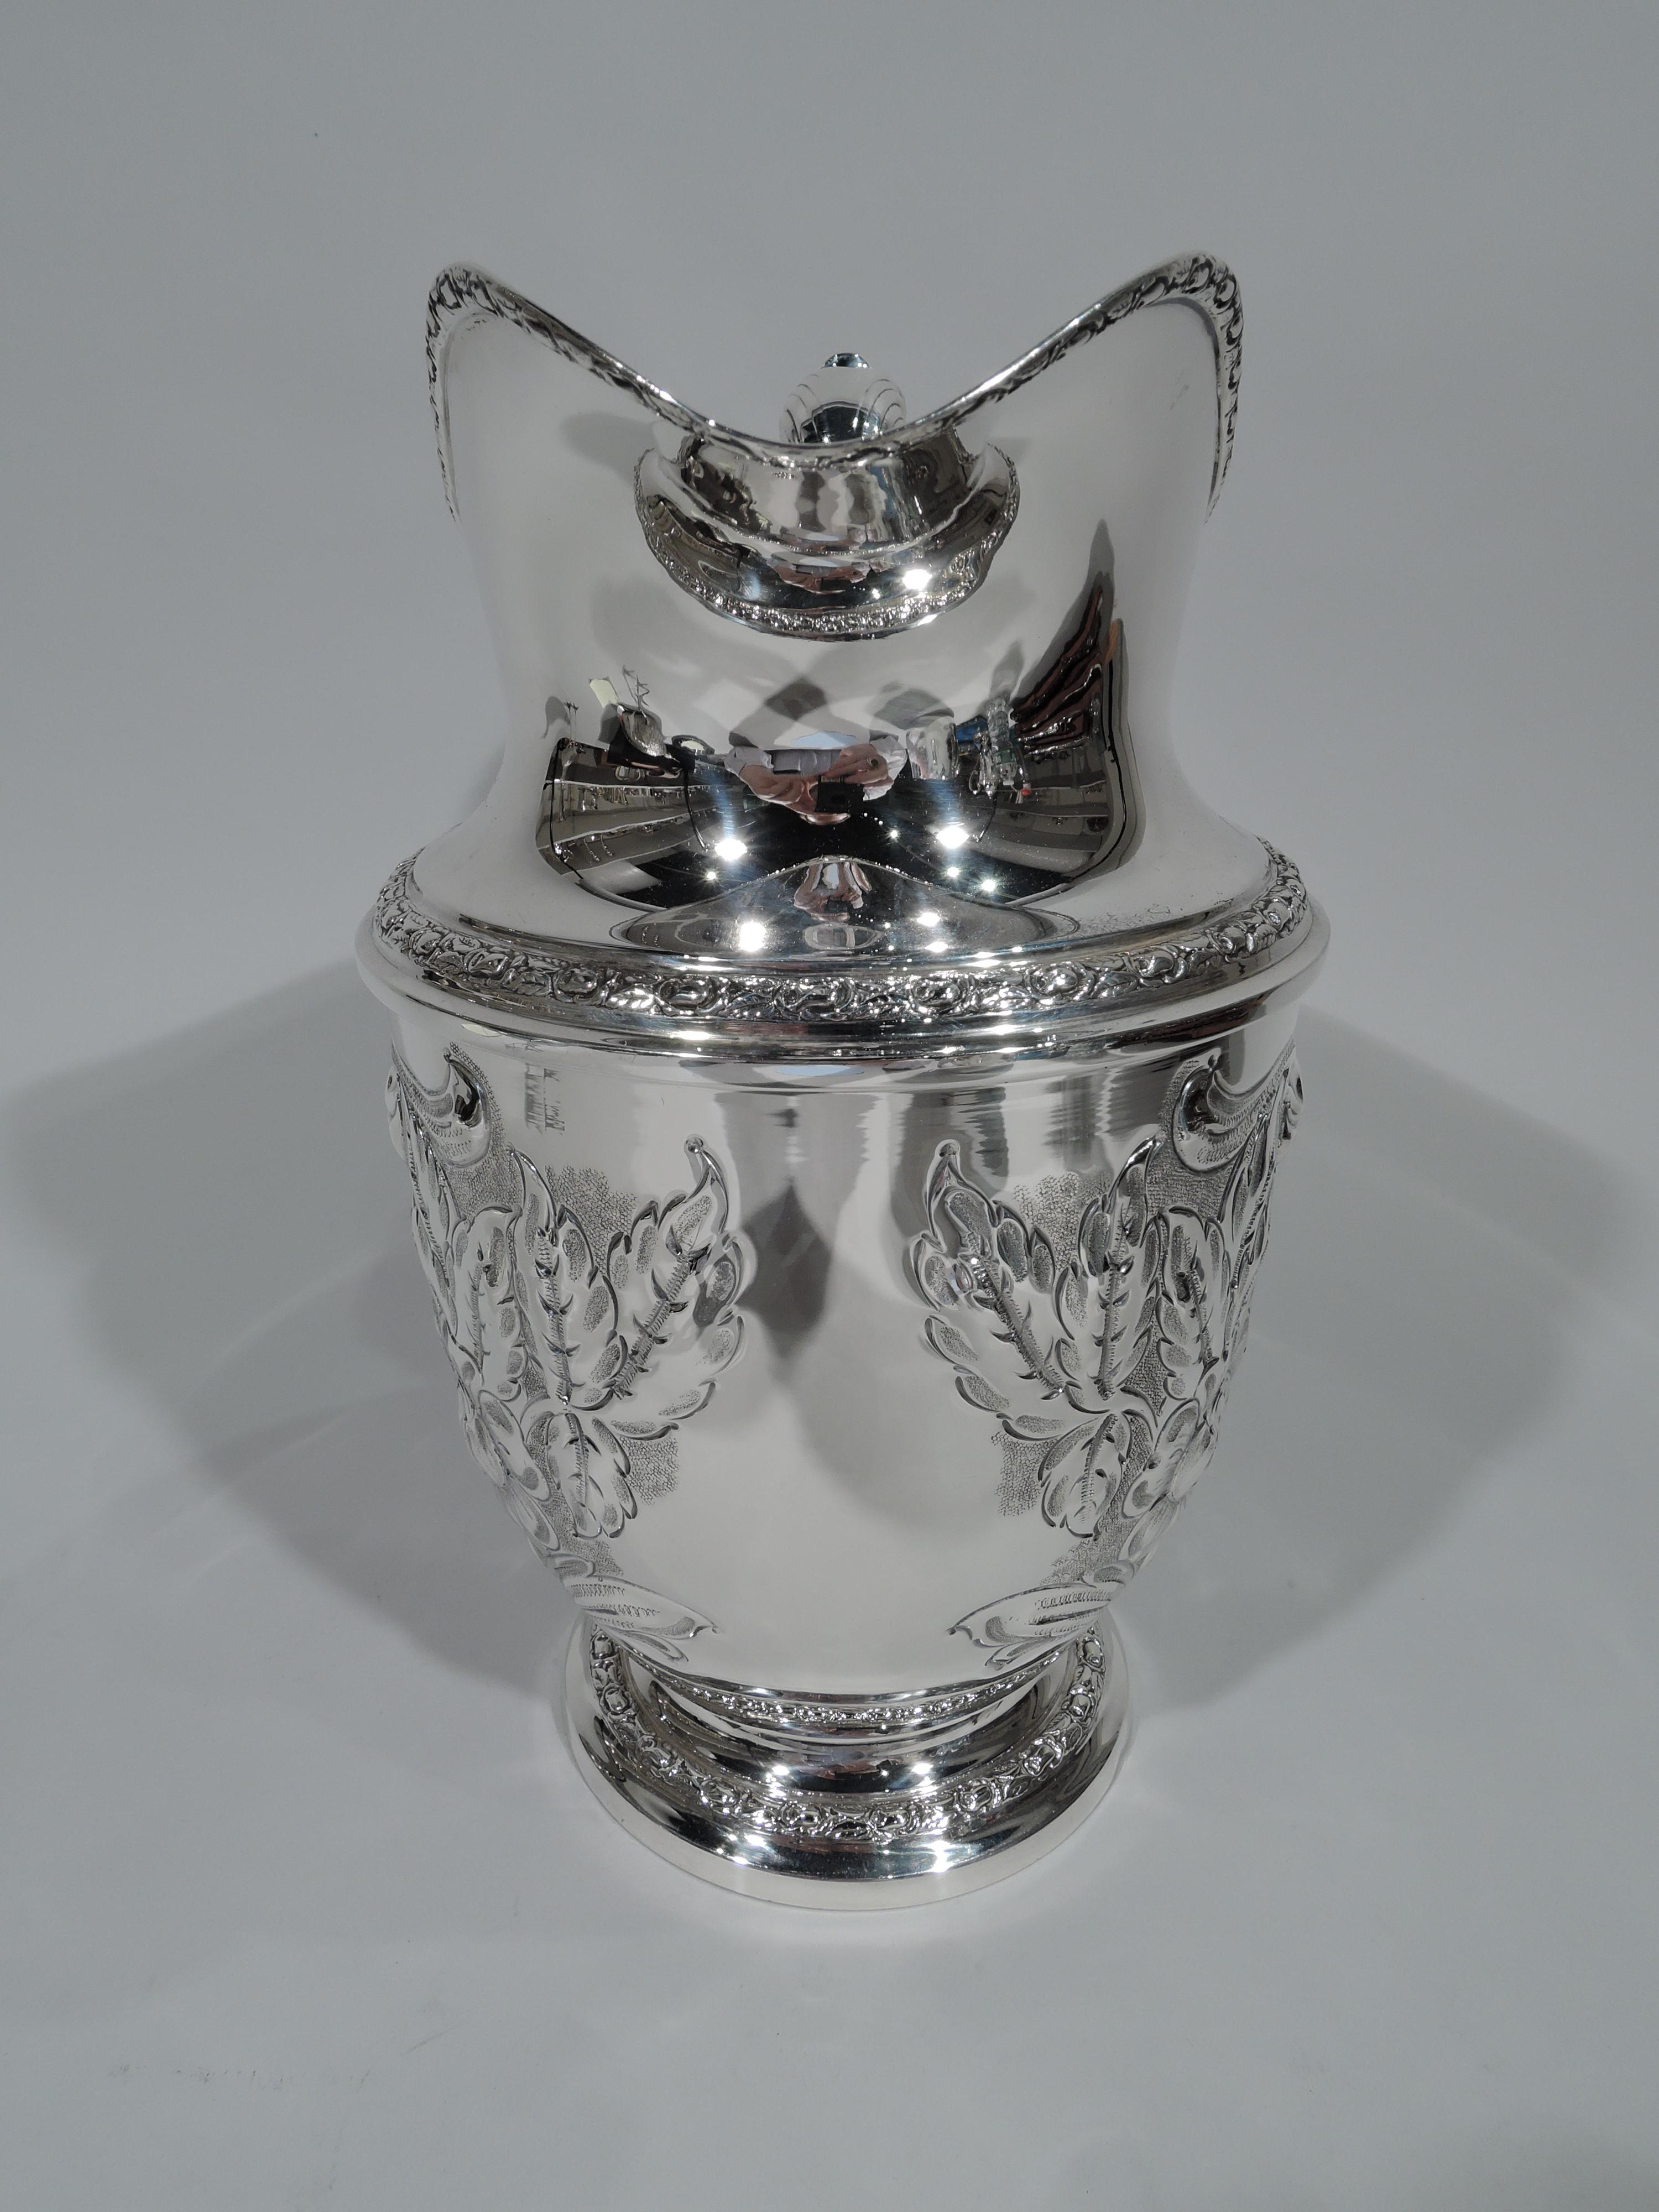 Pretty sterling silver water pitcher in Talisman Rose. Made by Frank M. Whiting in North Attleboro, Mass. Helmet mouth, leaf-capped scroll handle, and stepped foot. Chased floral frames (vacant) and borders. A nice piece in this pattern, which was